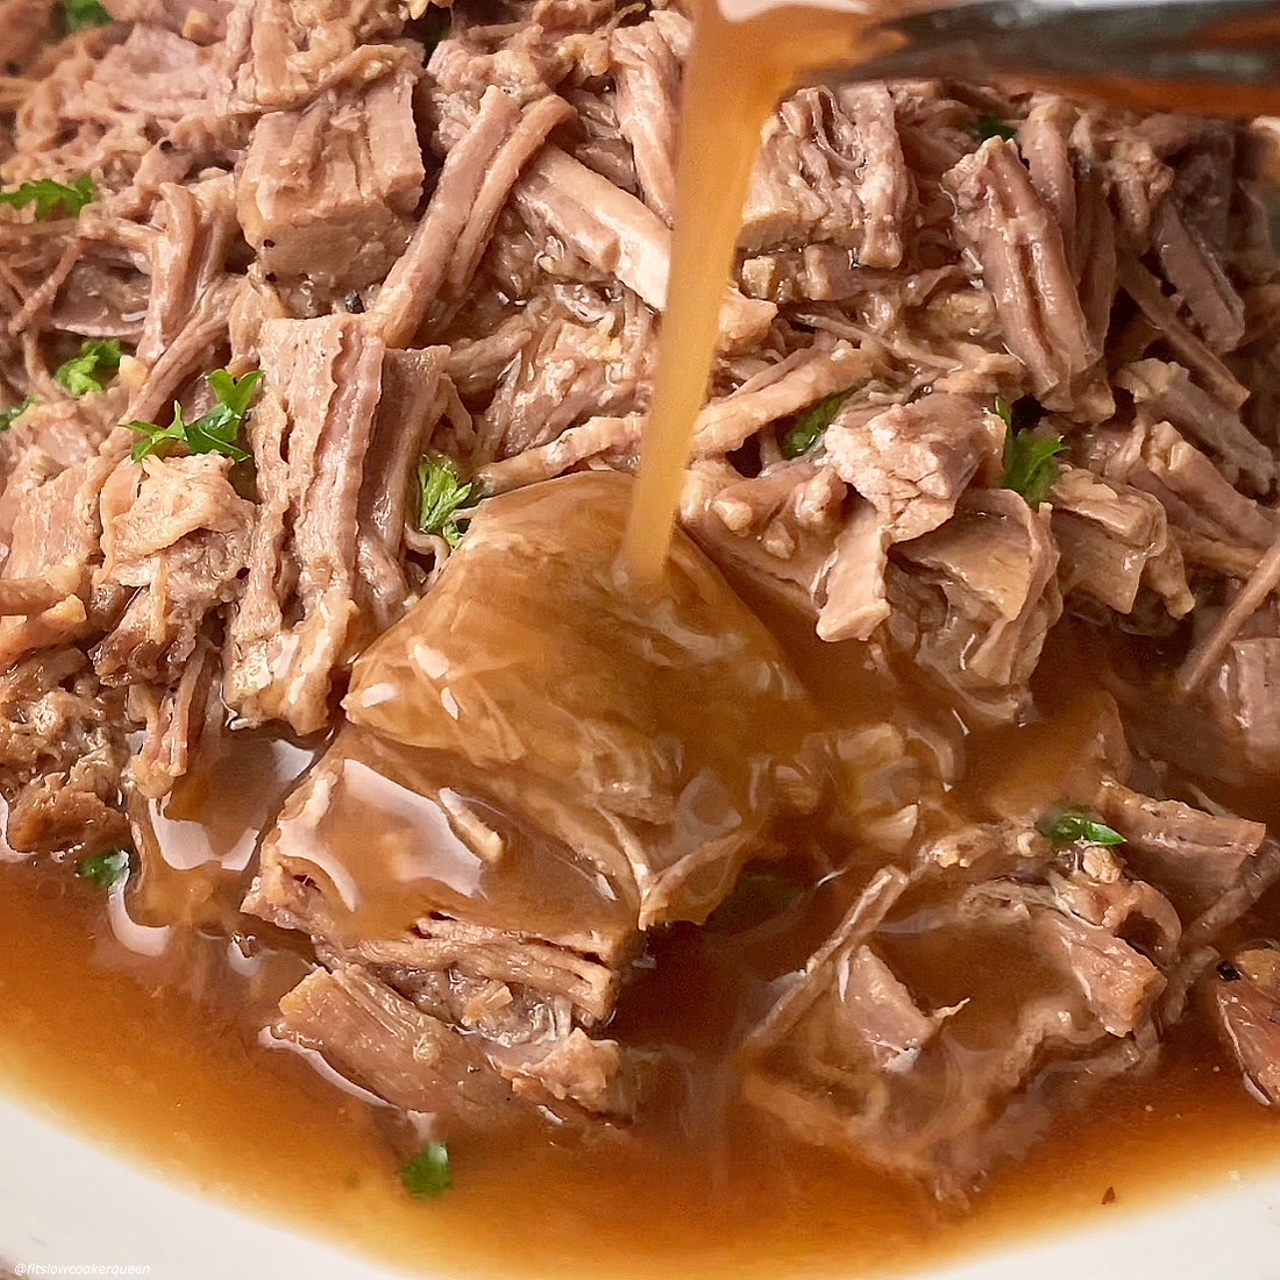 shredded brisket with gravy being poured on top